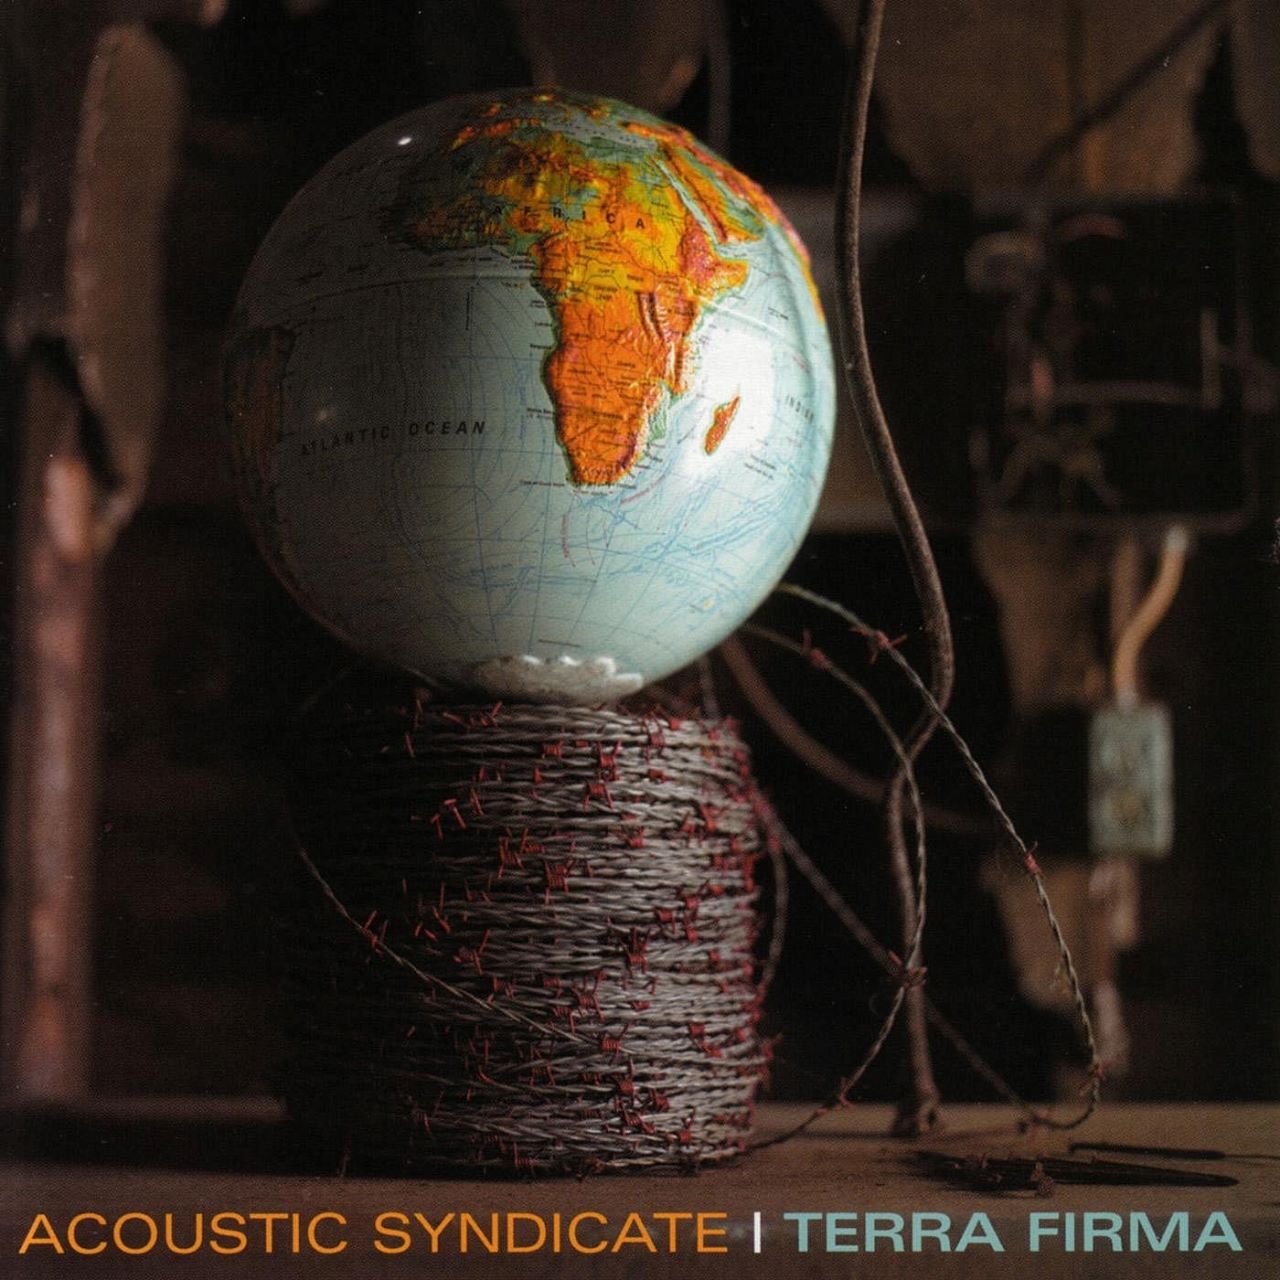 Acoustic Syndicate - Terra Firma cover album